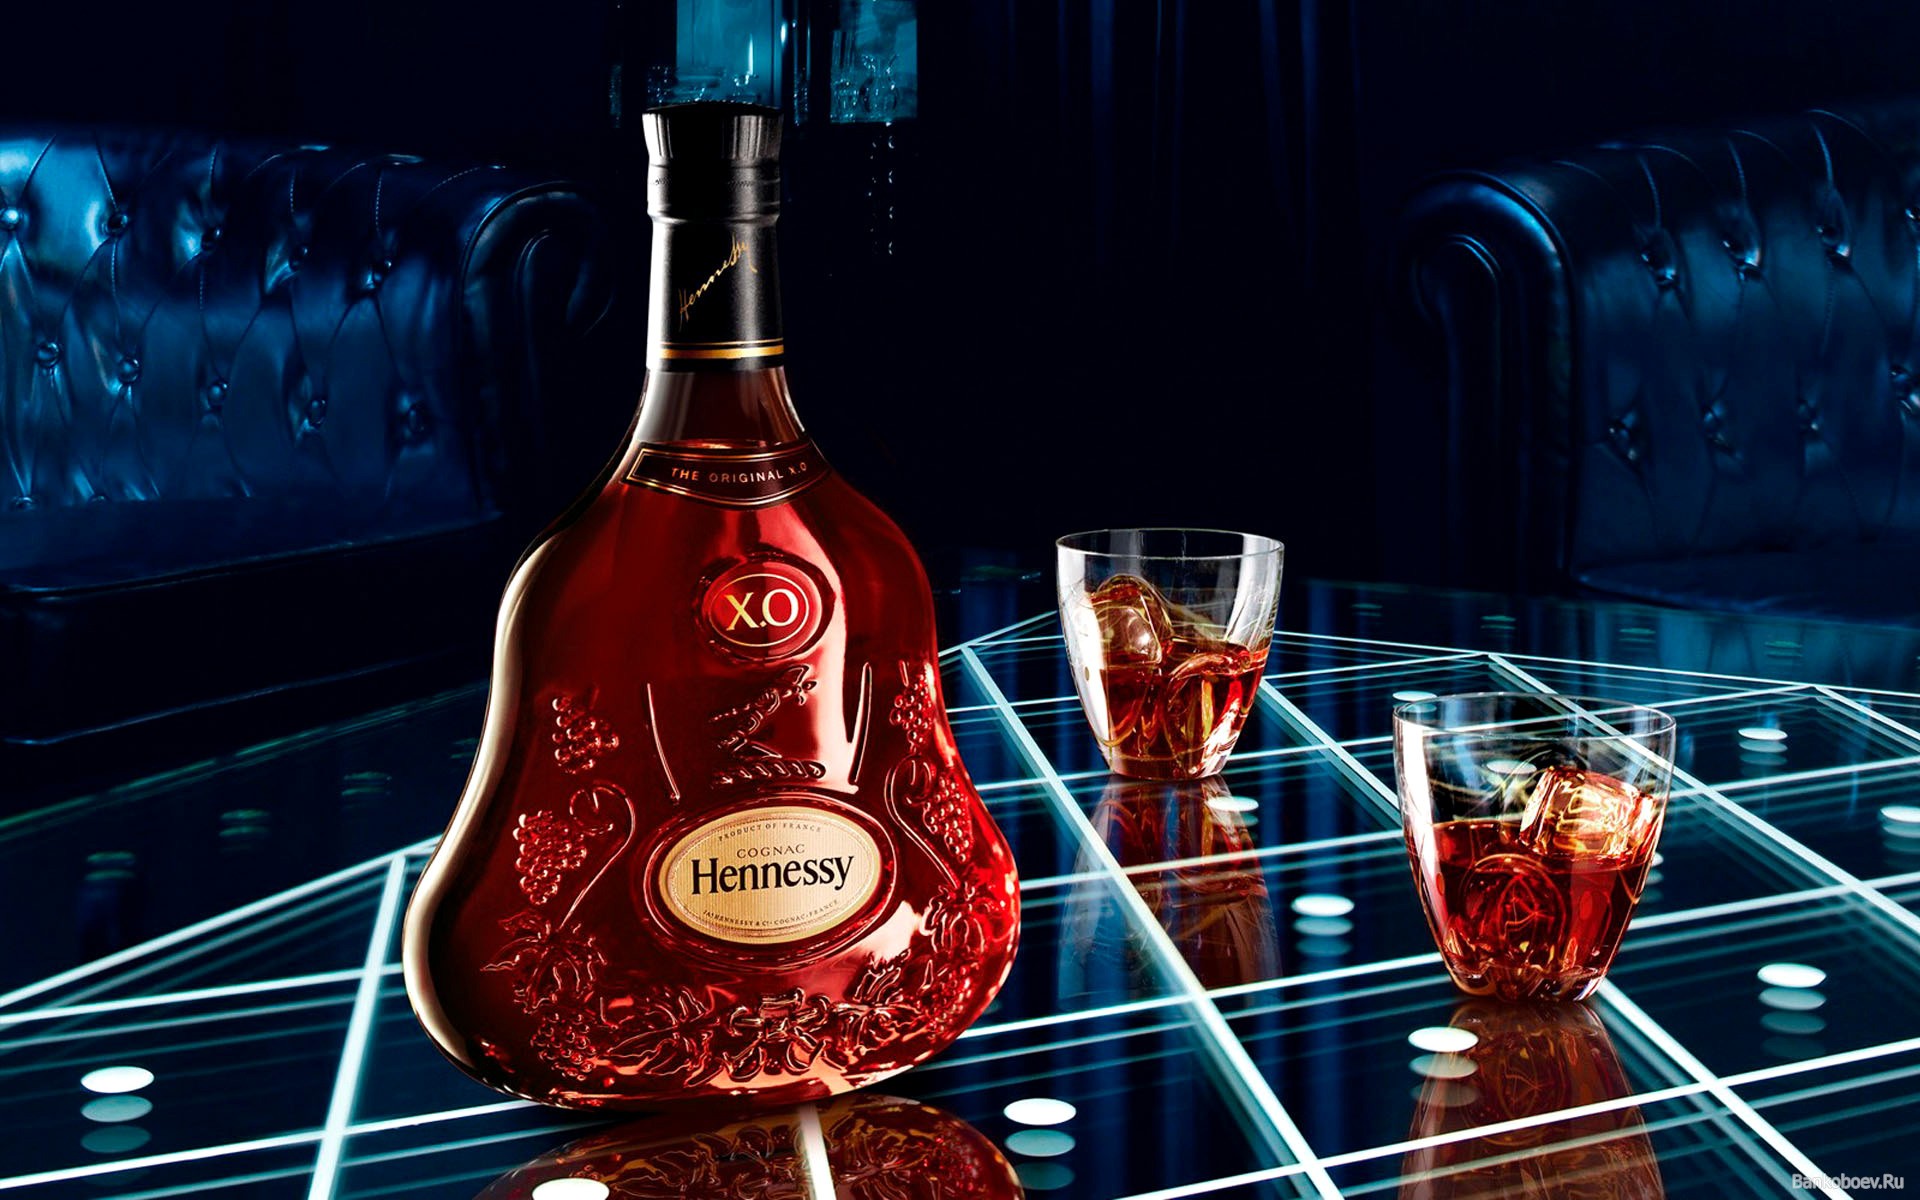 Hennessy HD Wallpaper Background